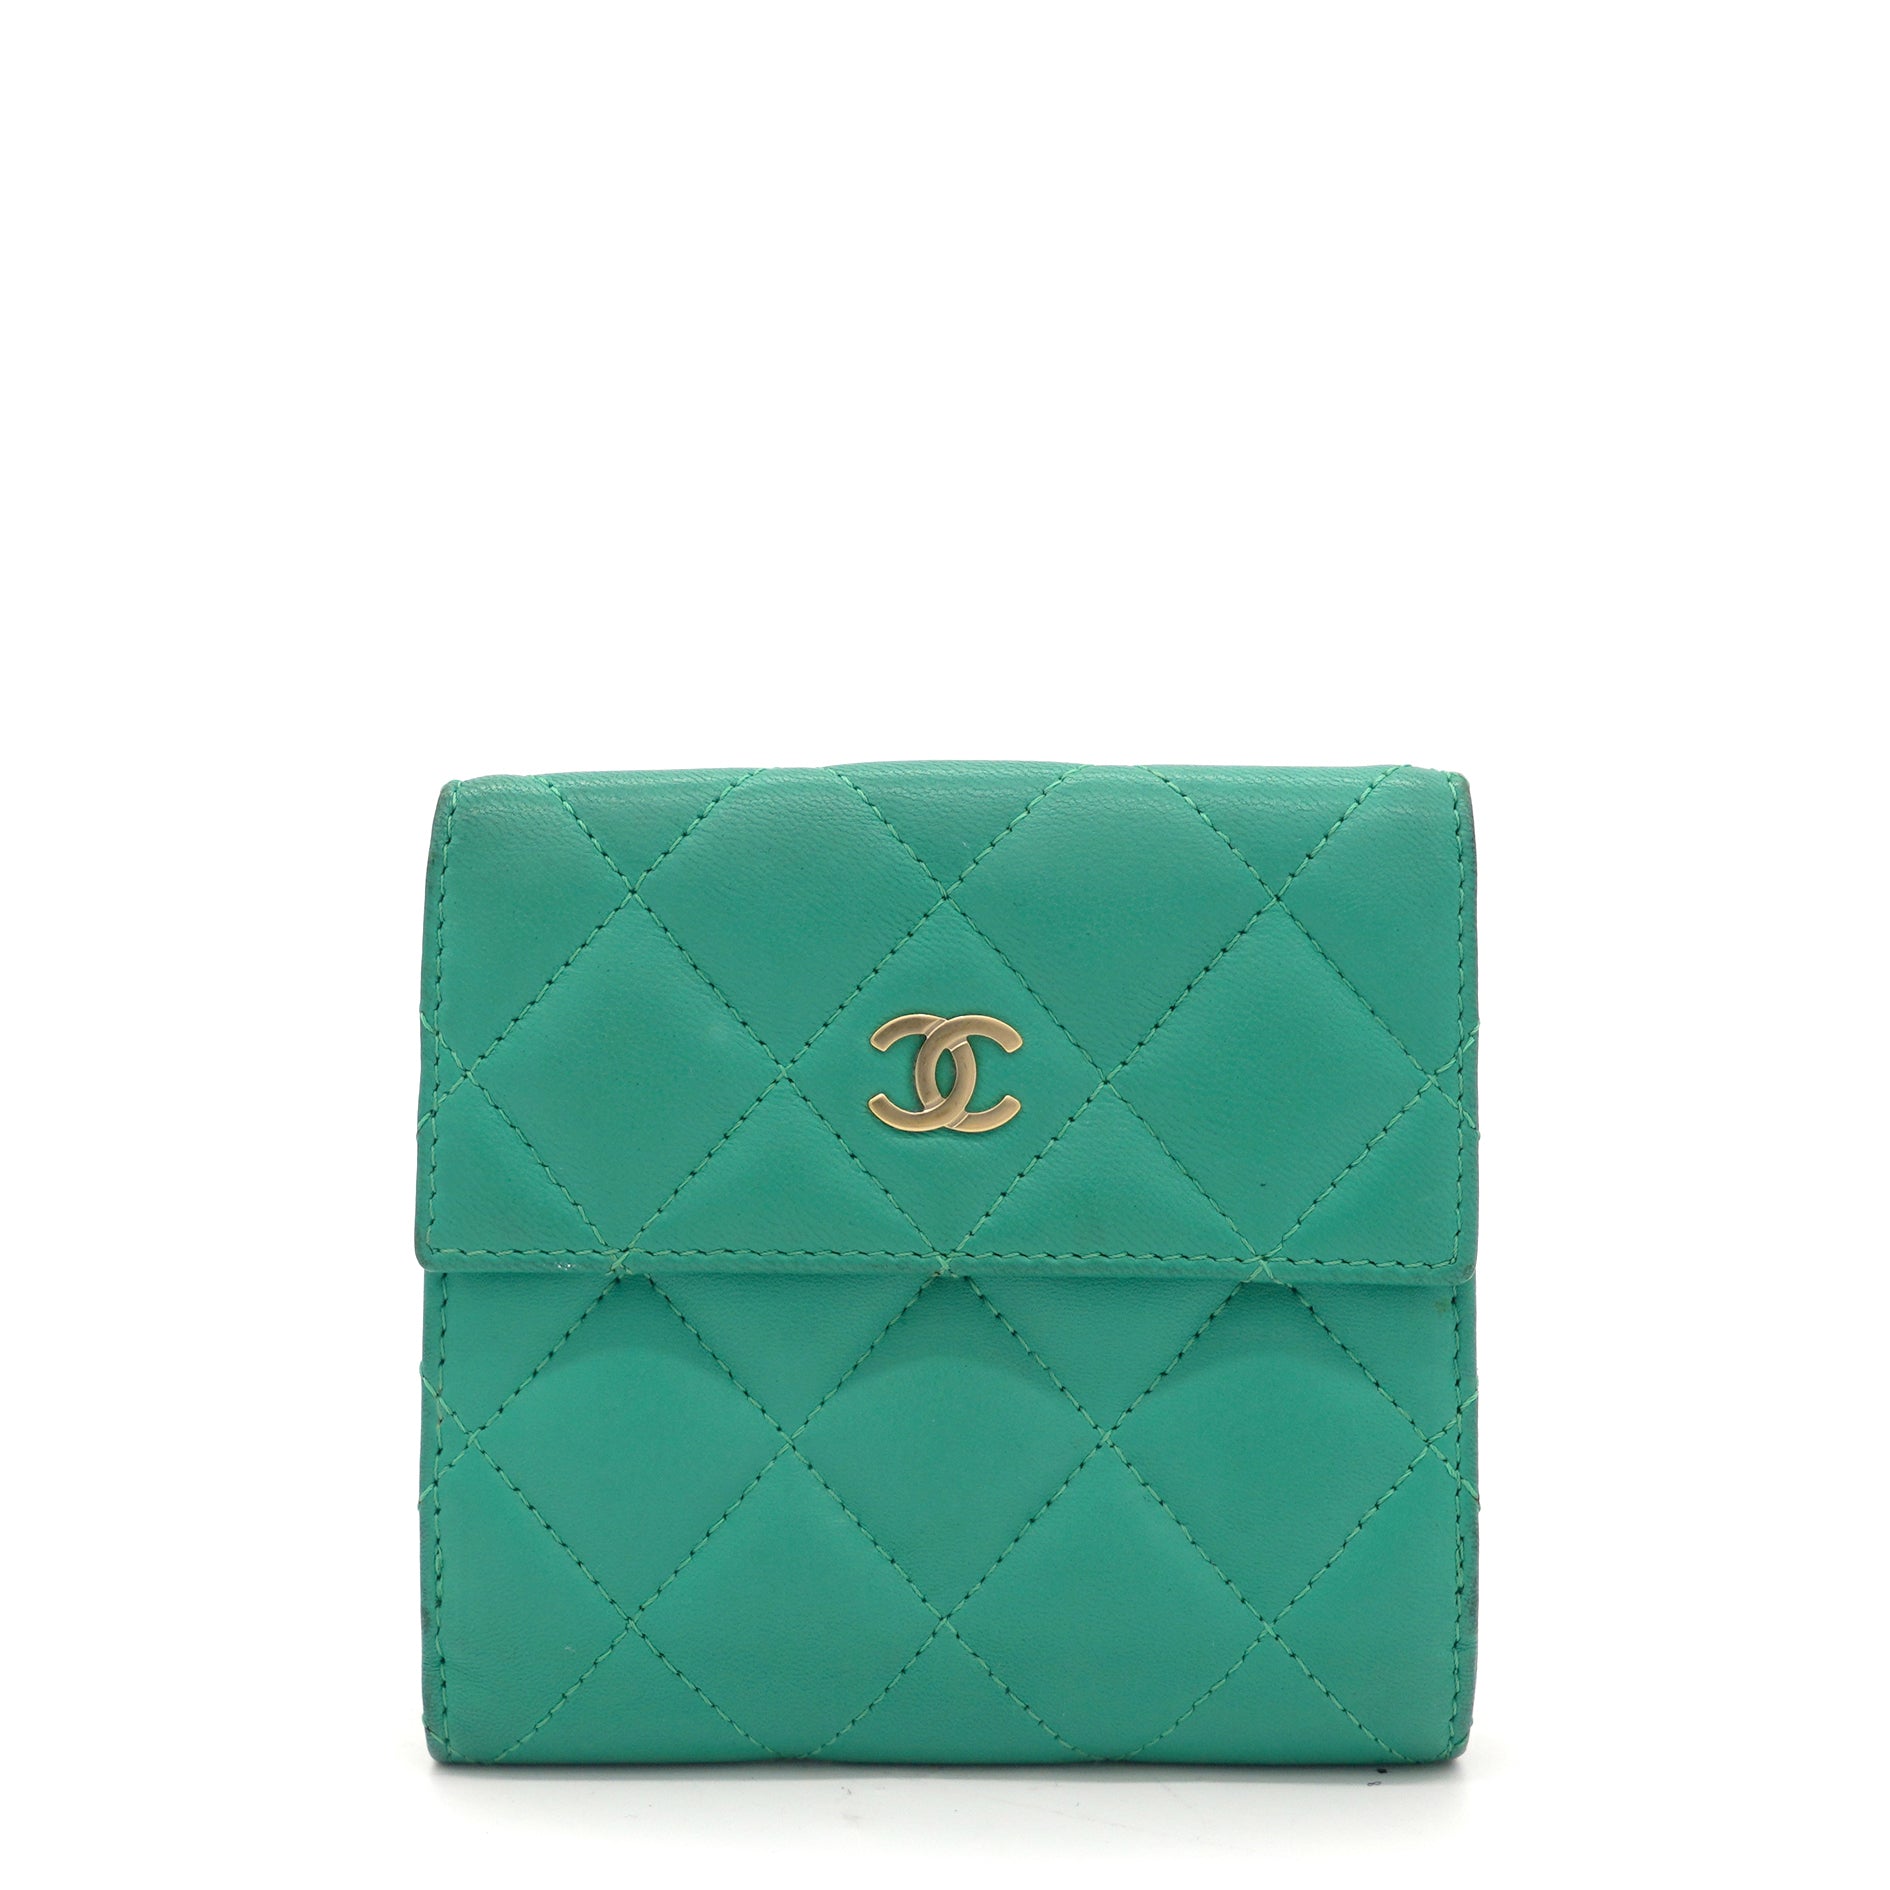 Glampot - Own this gorgeous, Green Lambskin Long Flap Wallet from